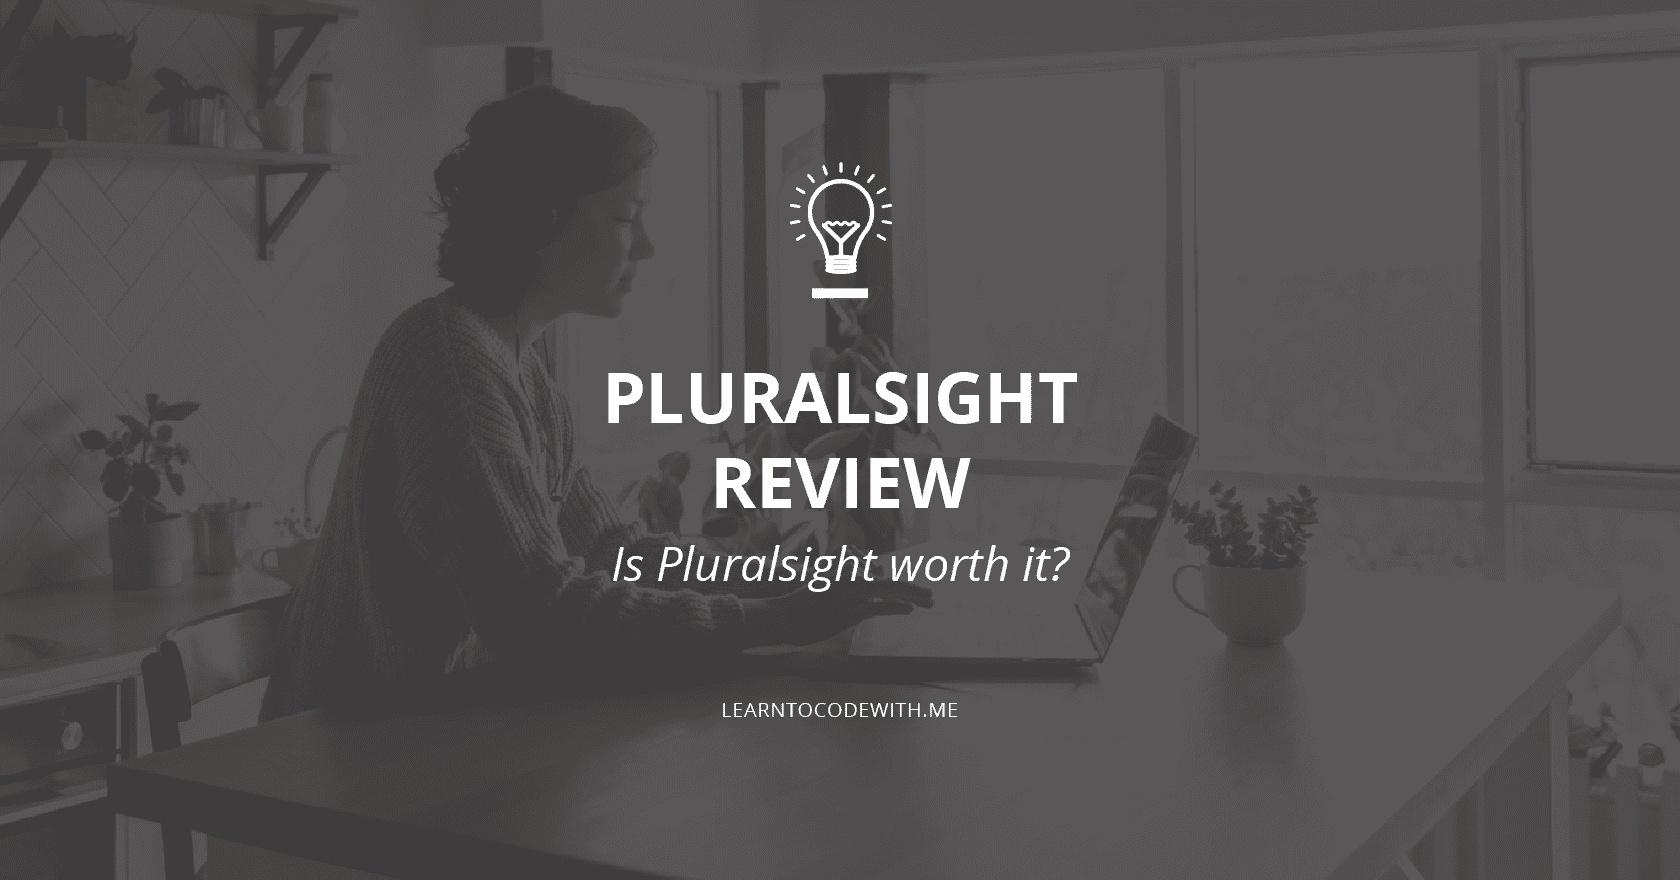 Pluralsight Review: Is Pluralsight worth it for learning new tech skills?